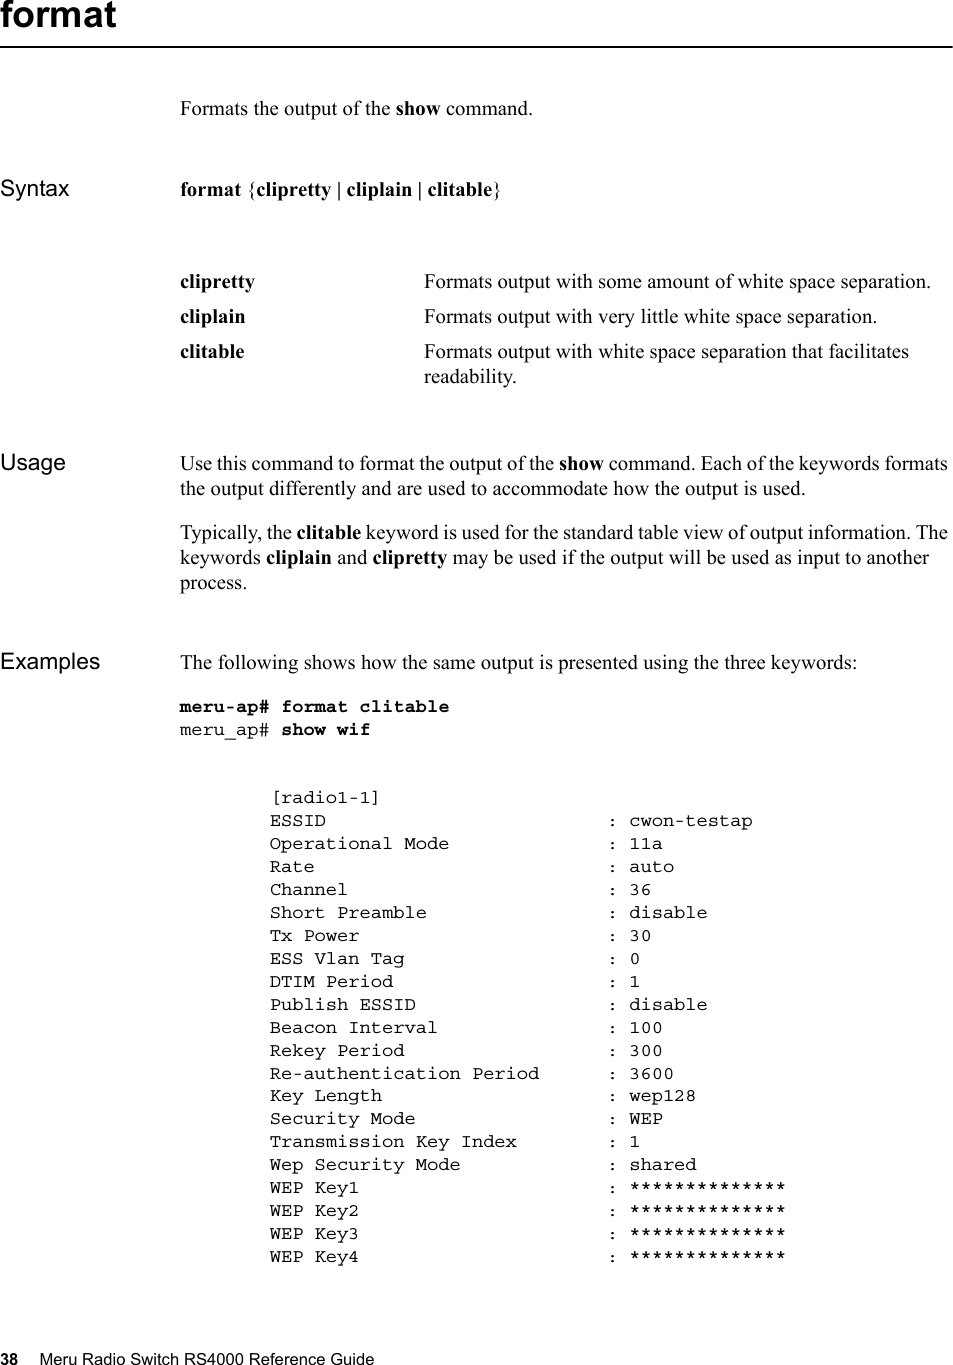 38 Meru Radio Switch RS4000 Reference Guide formatFormats the output of the show command.Syntax format {clipretty | cliplain | clitable}Usage Use this command to format the output of the show command. Each of the keywords formats the output differently and are used to accommodate how the output is used.Typically, the clitable keyword is used for the standard table view of output information. The keywords cliplain and clipretty may be used if the output will be used as input to another process.Examples The following shows how the same output is presented using the three keywords:meru-ap# format clitablemeru_ap# show wif        [radio1-1]        ESSID                         : cwon-testap        Operational Mode              : 11a        Rate                          : auto        Channel                       : 36        Short Preamble                : disable        Tx Power                      : 30        ESS Vlan Tag                  : 0        DTIM Period                   : 1        Publish ESSID                 : disable        Beacon Interval               : 100        Rekey Period                  : 300        Re-authentication Period      : 3600        Key Length                    : wep128        Security Mode                 : WEP        Transmission Key Index        : 1        Wep Security Mode             : shared        WEP Key1                      : **************        WEP Key2                      : **************        WEP Key3                      : **************        WEP Key4                      : **************clipretty Formats output with some amount of white space separation. cliplain Formats output with very little white space separation. clitable Formats output with white space separation that facilitates readability. 